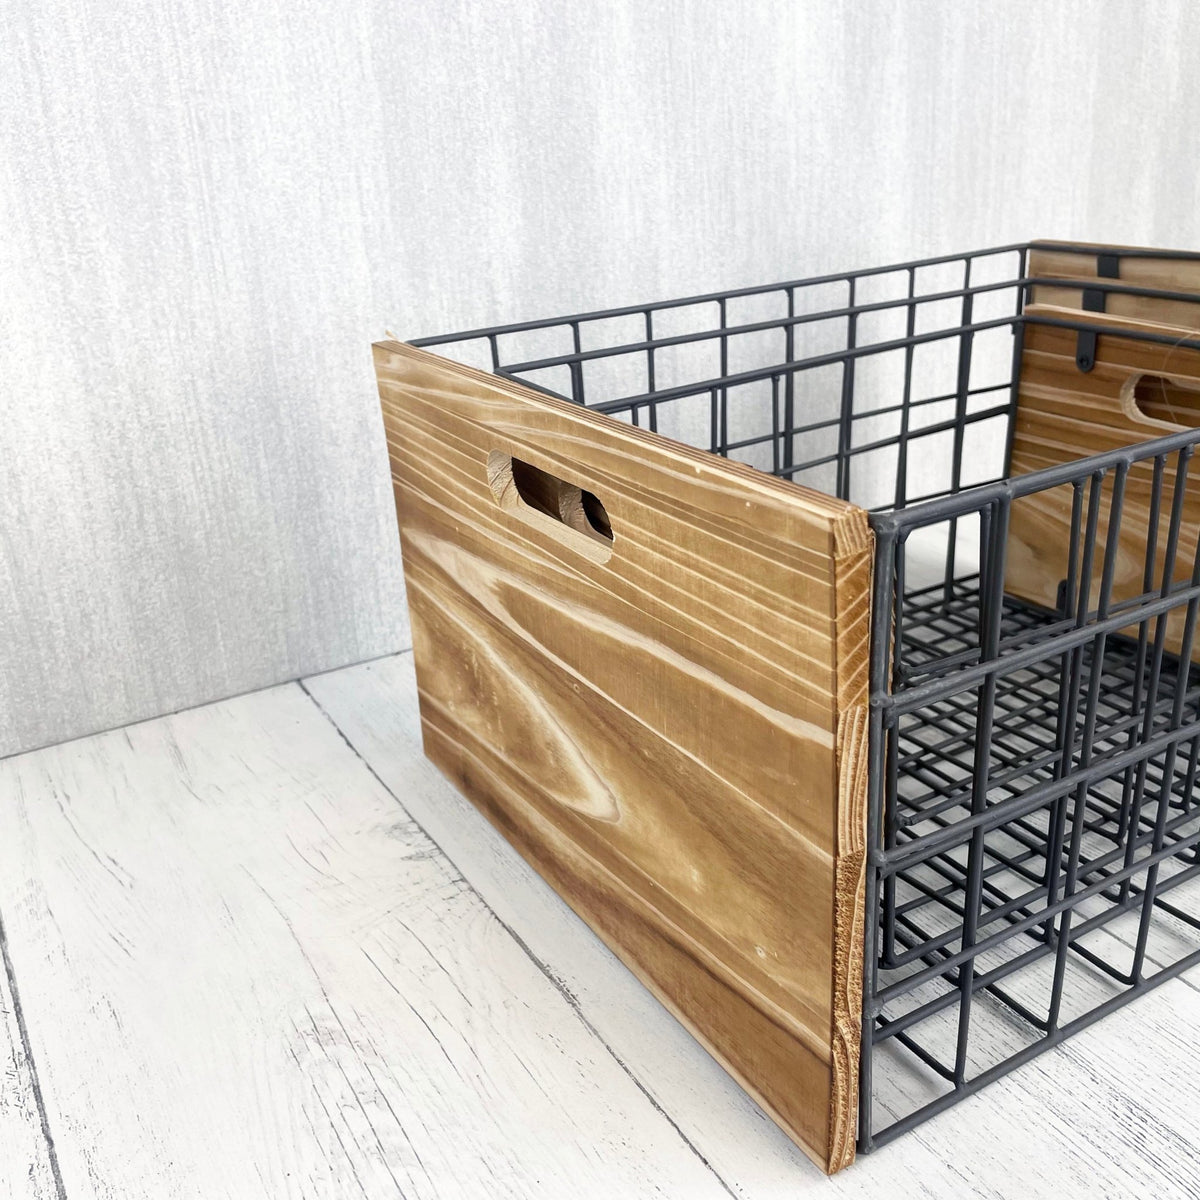 Decorative Wire / Wood Stackable Storage Crates close up